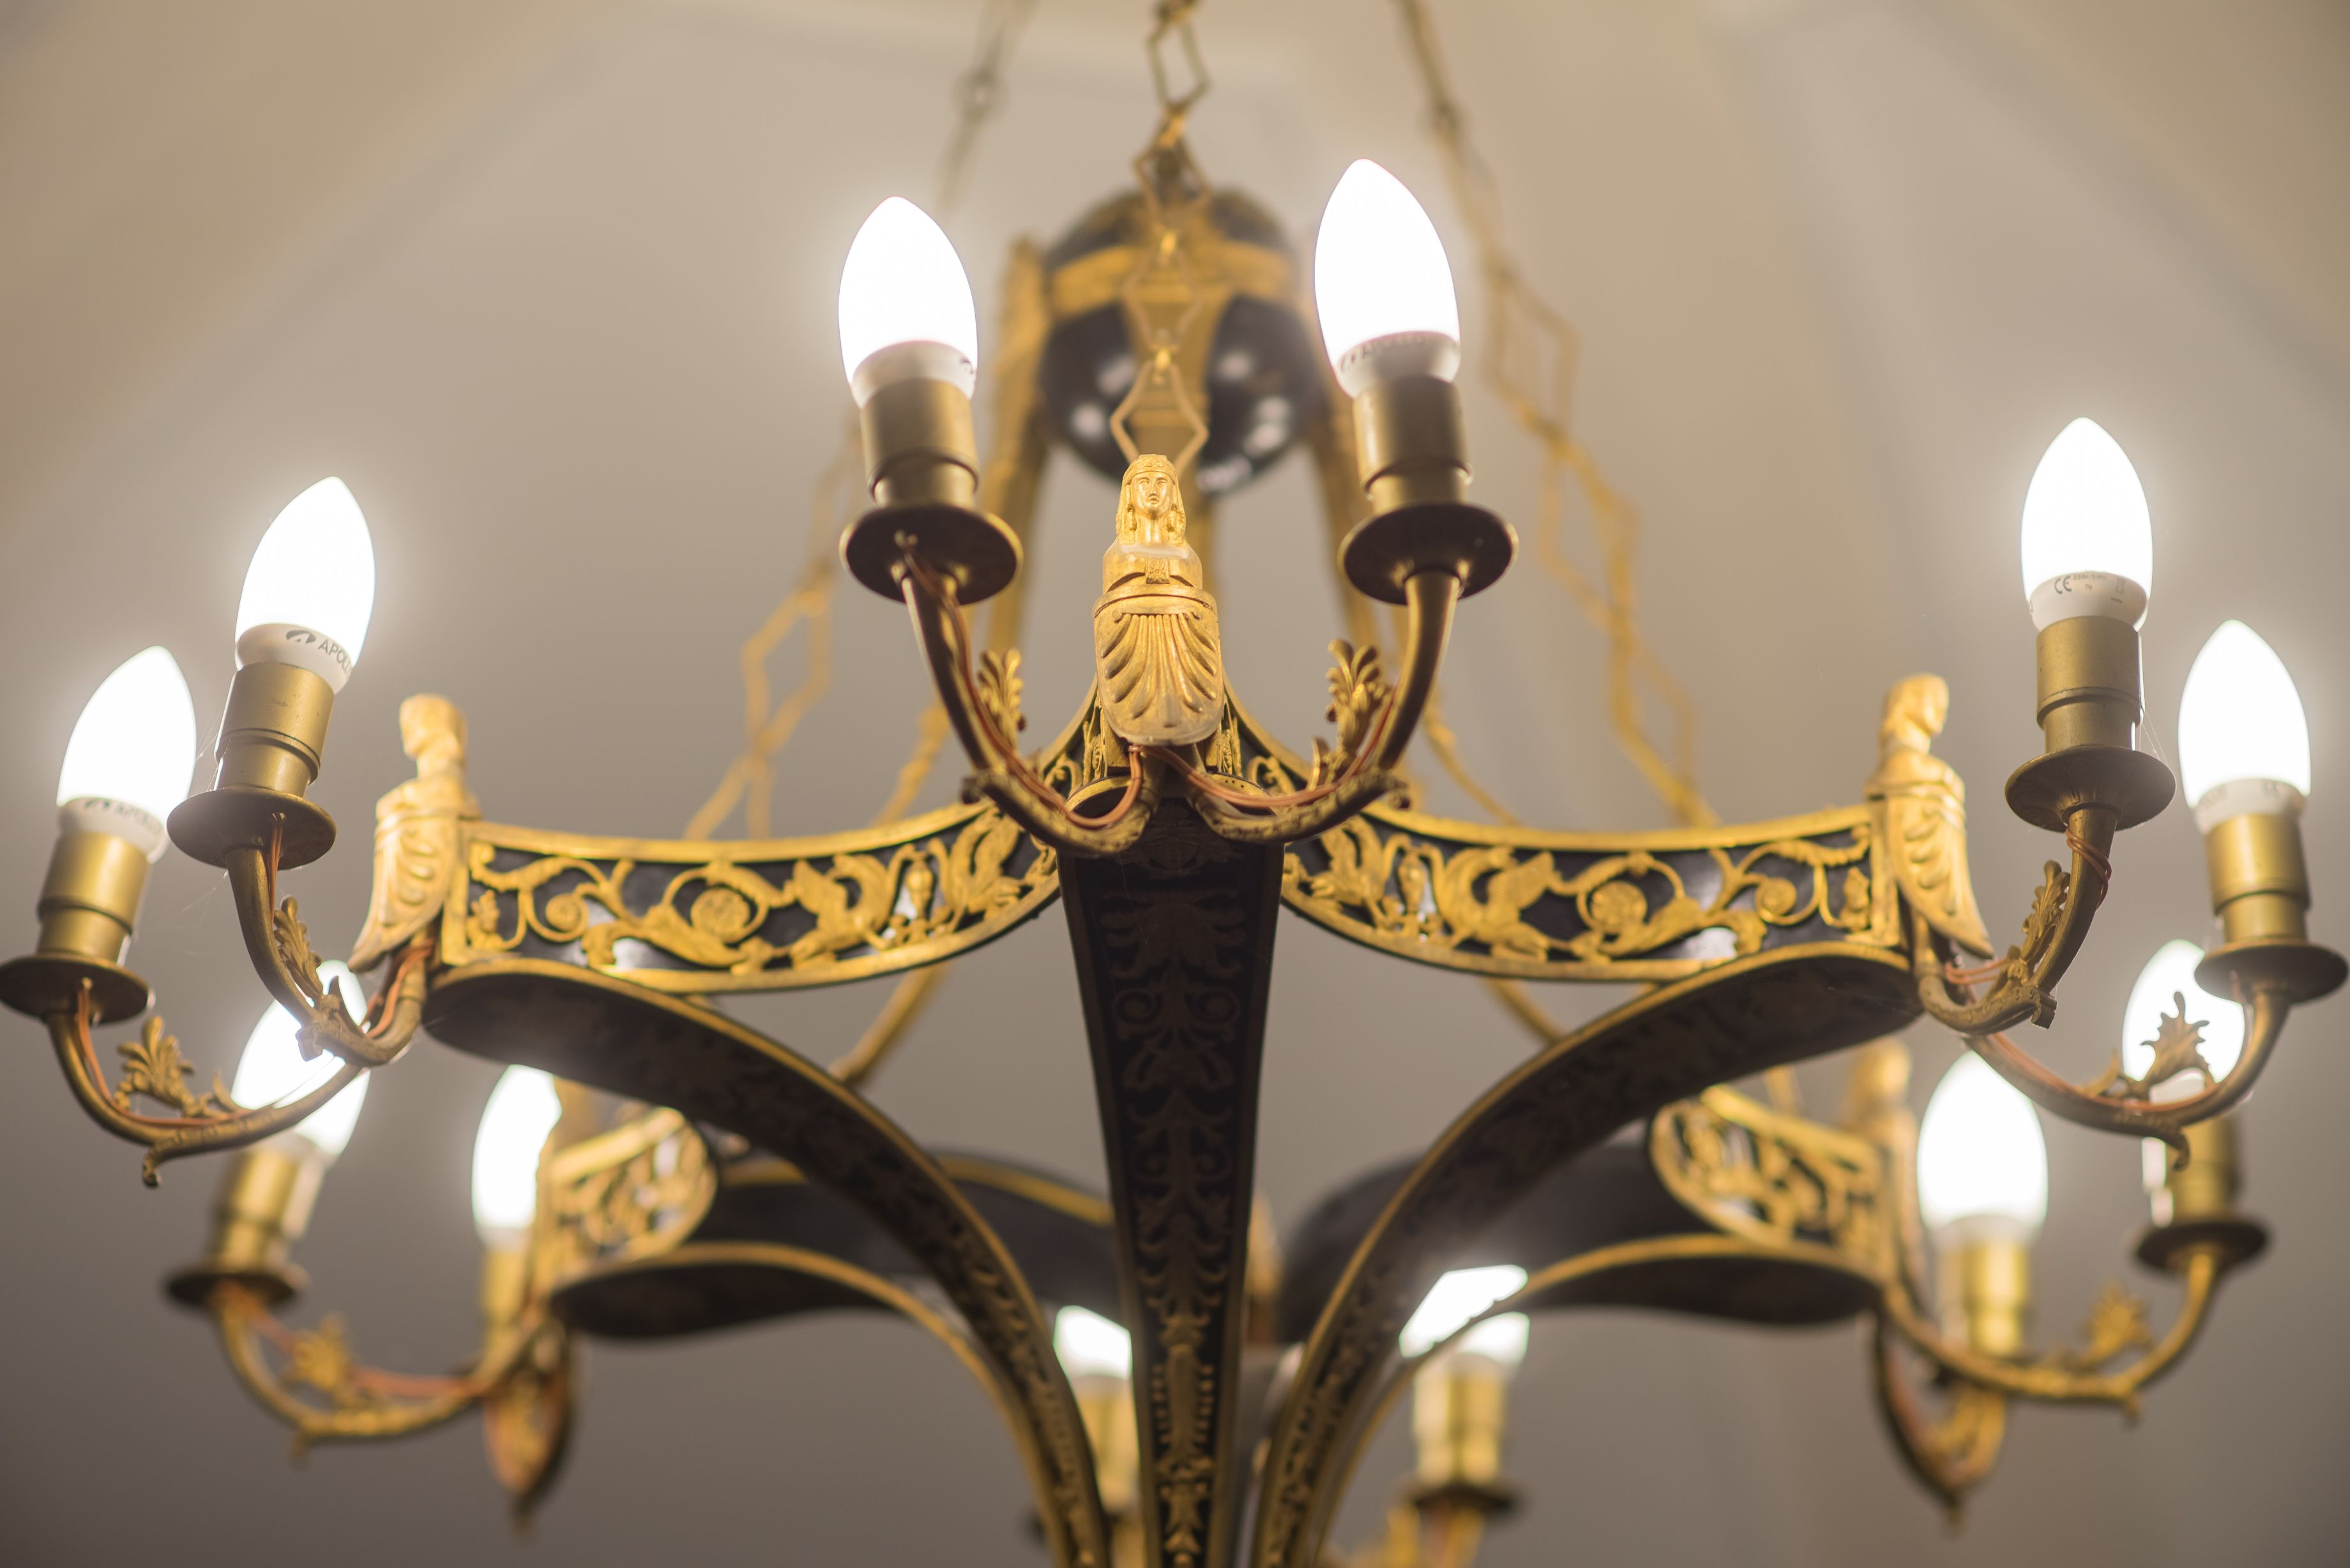 Fragment of chandelier, 1800–1849, Archdiocese of Vilnius. Photo by Povilas Jarmala, 2017